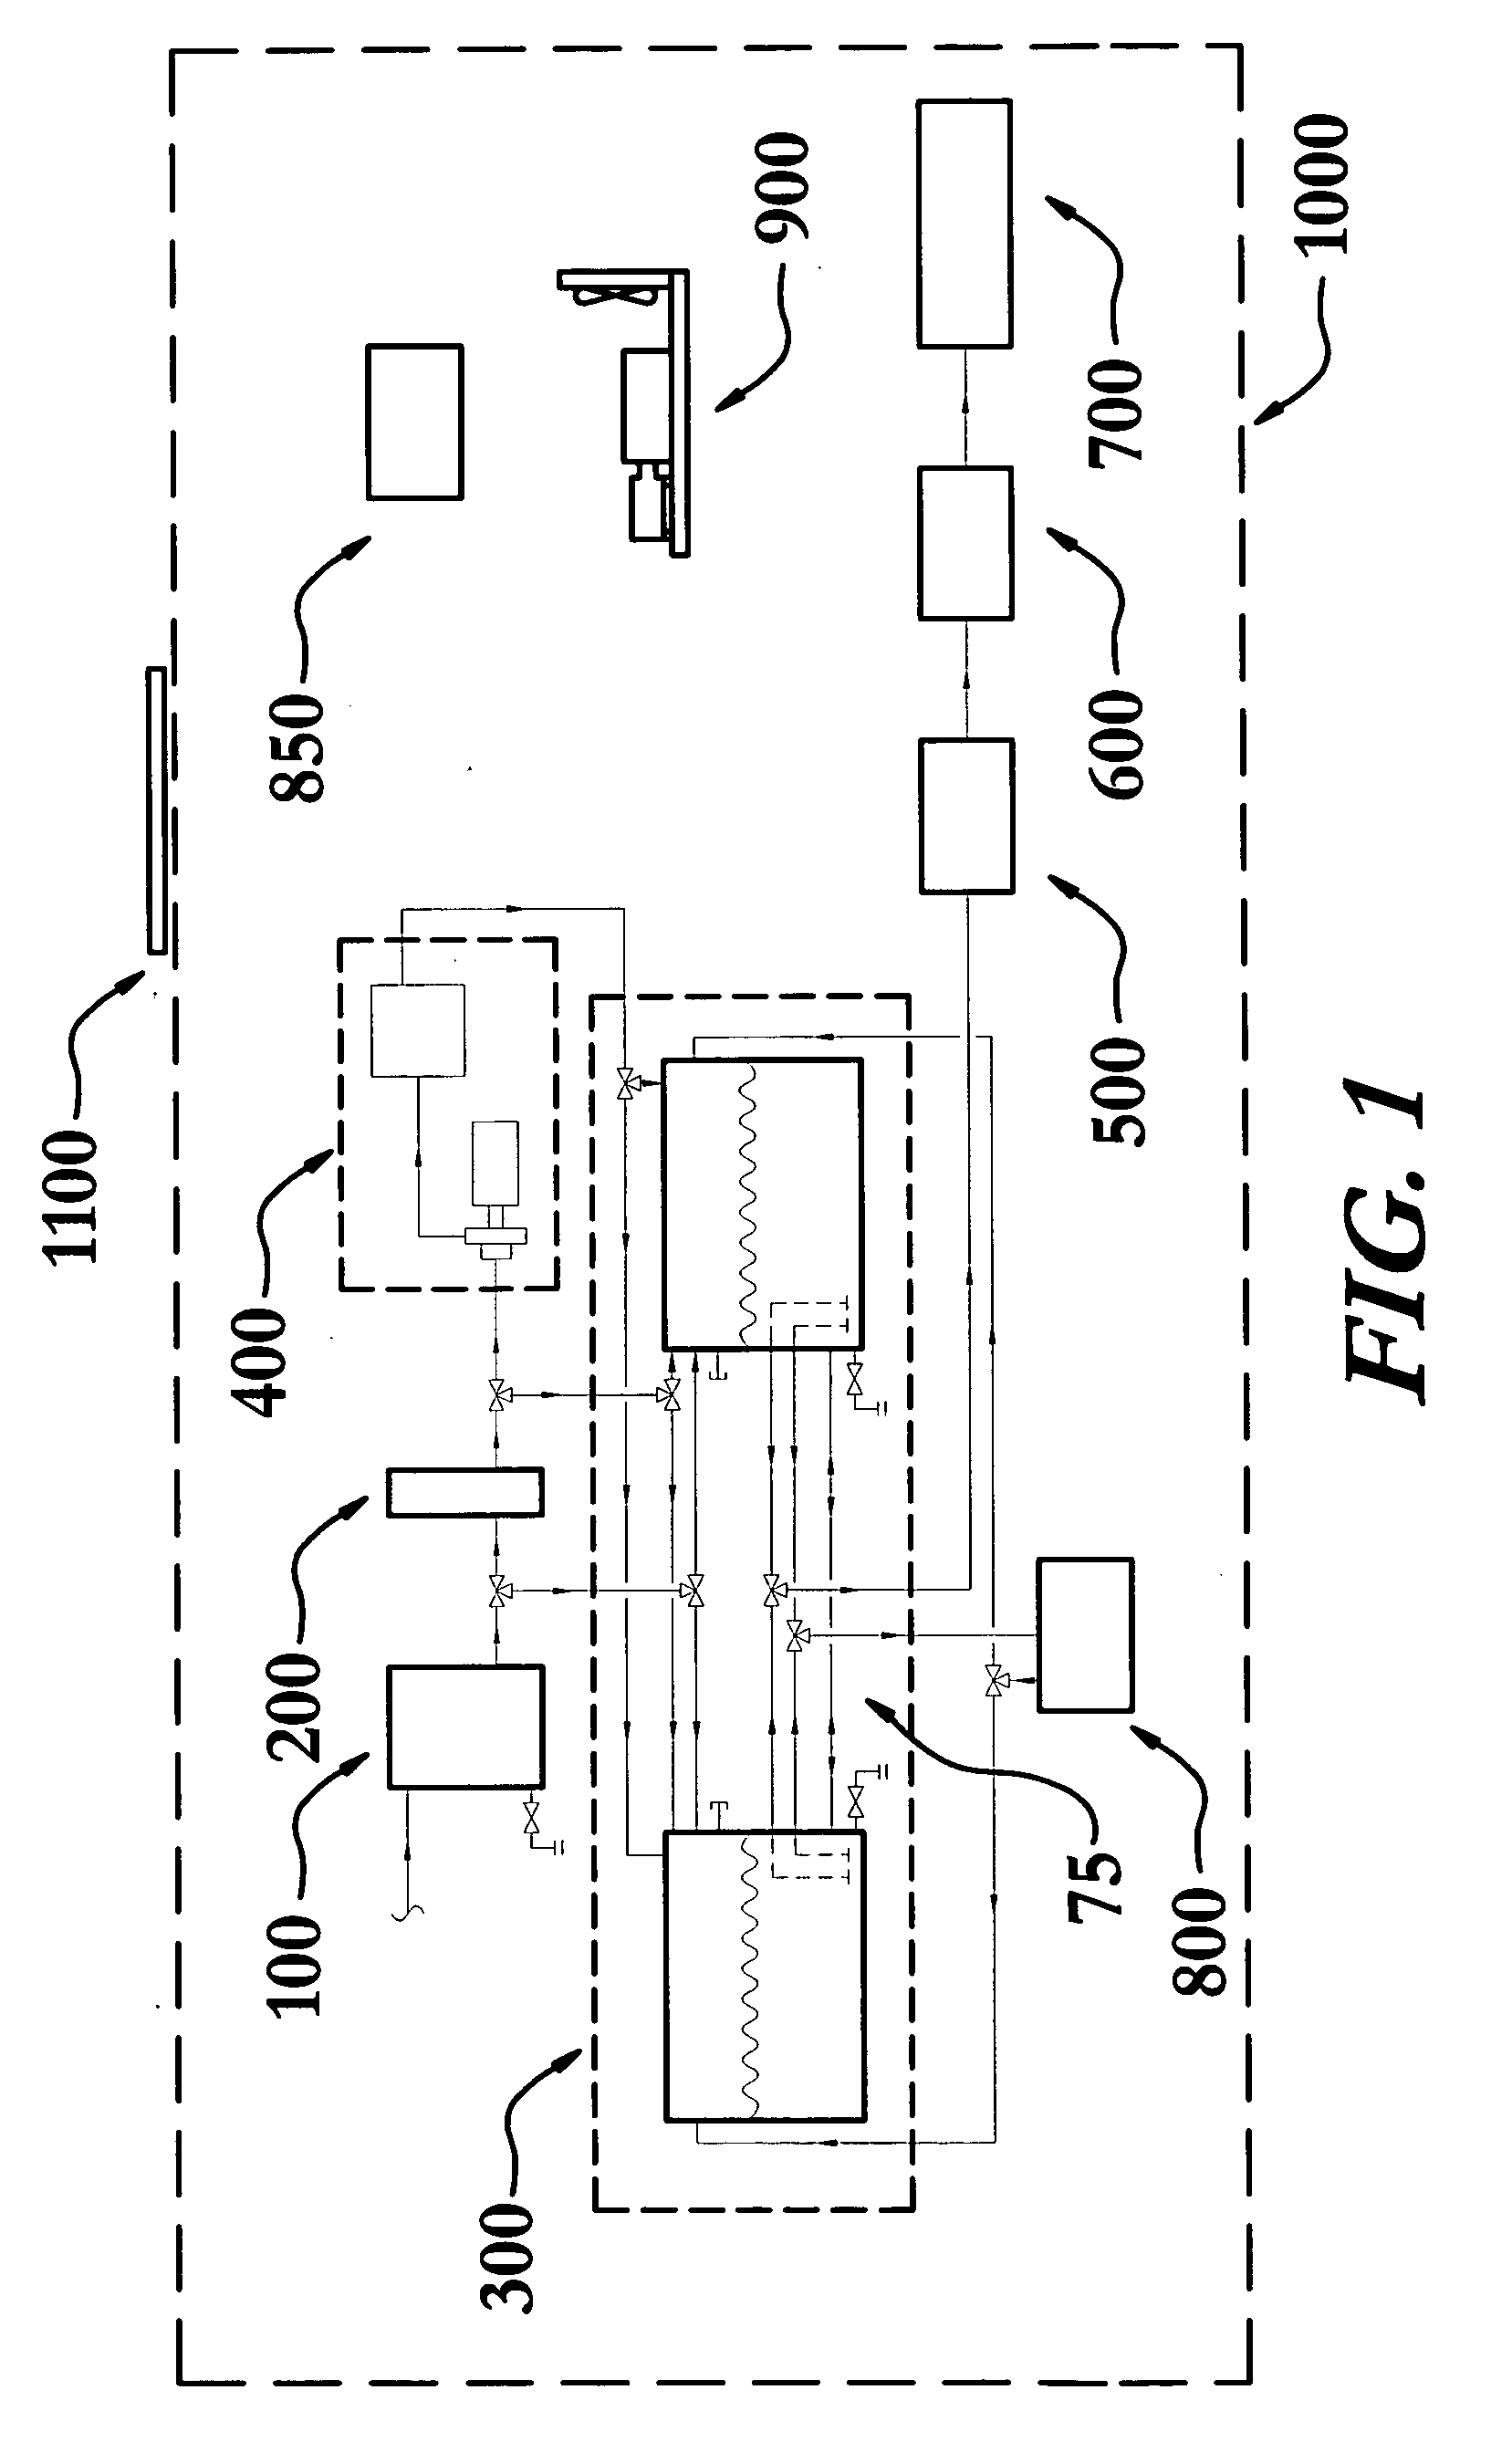 Mobile field electrical supply, water purification system, wash system, water collection, reclamation, and telecommunication apparatus